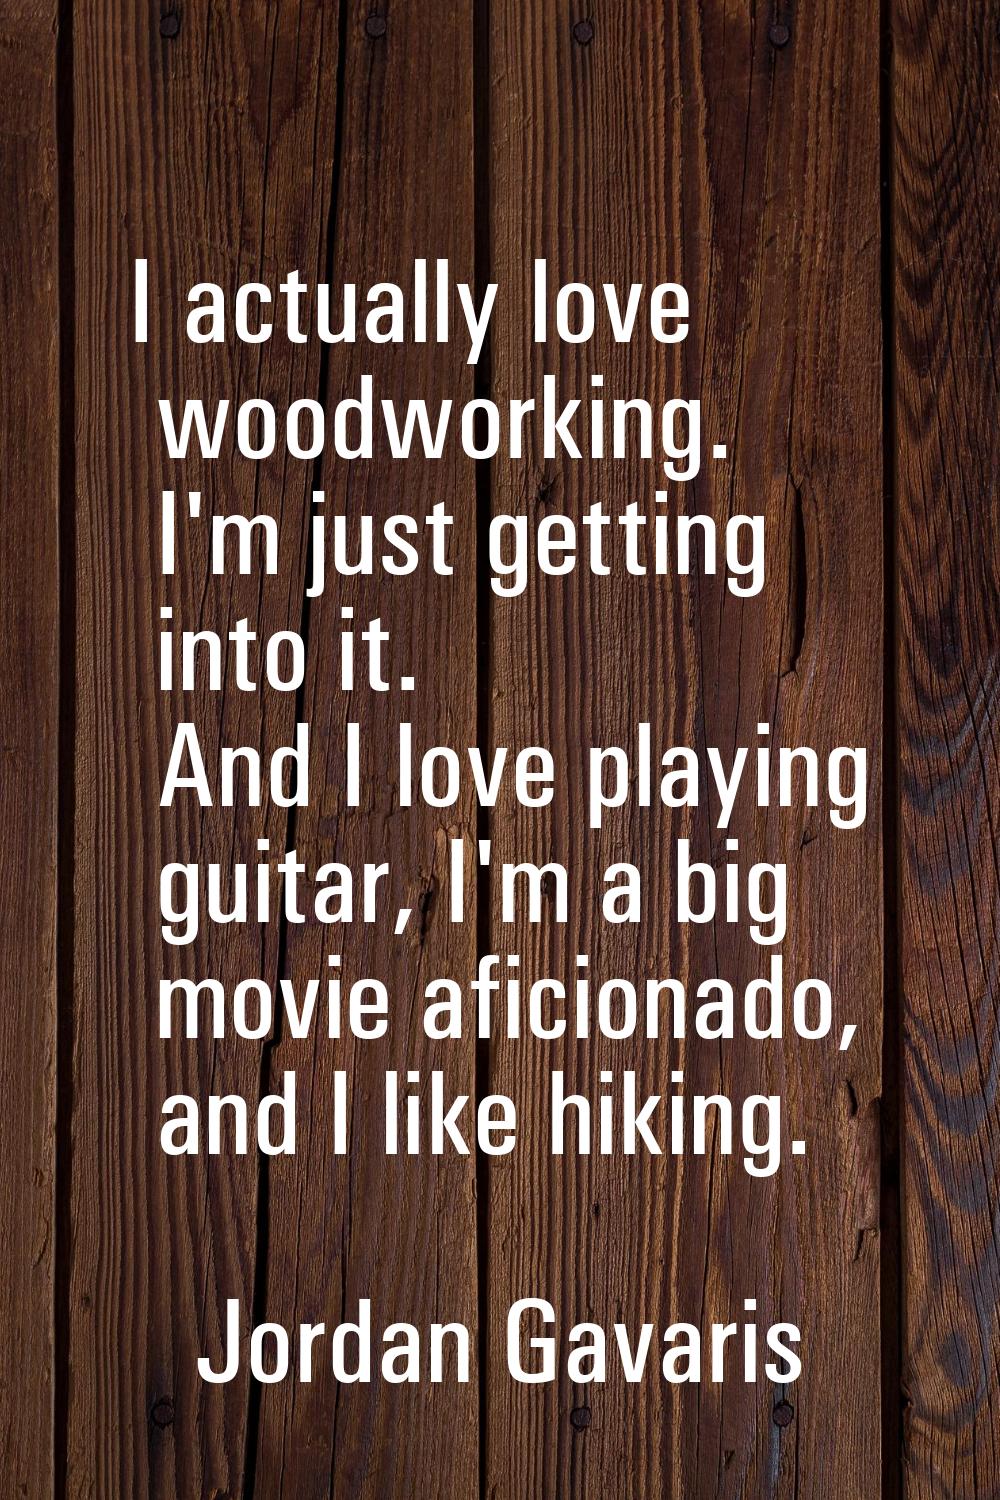 I actually love woodworking. I'm just getting into it. And I love playing guitar, I'm a big movie a